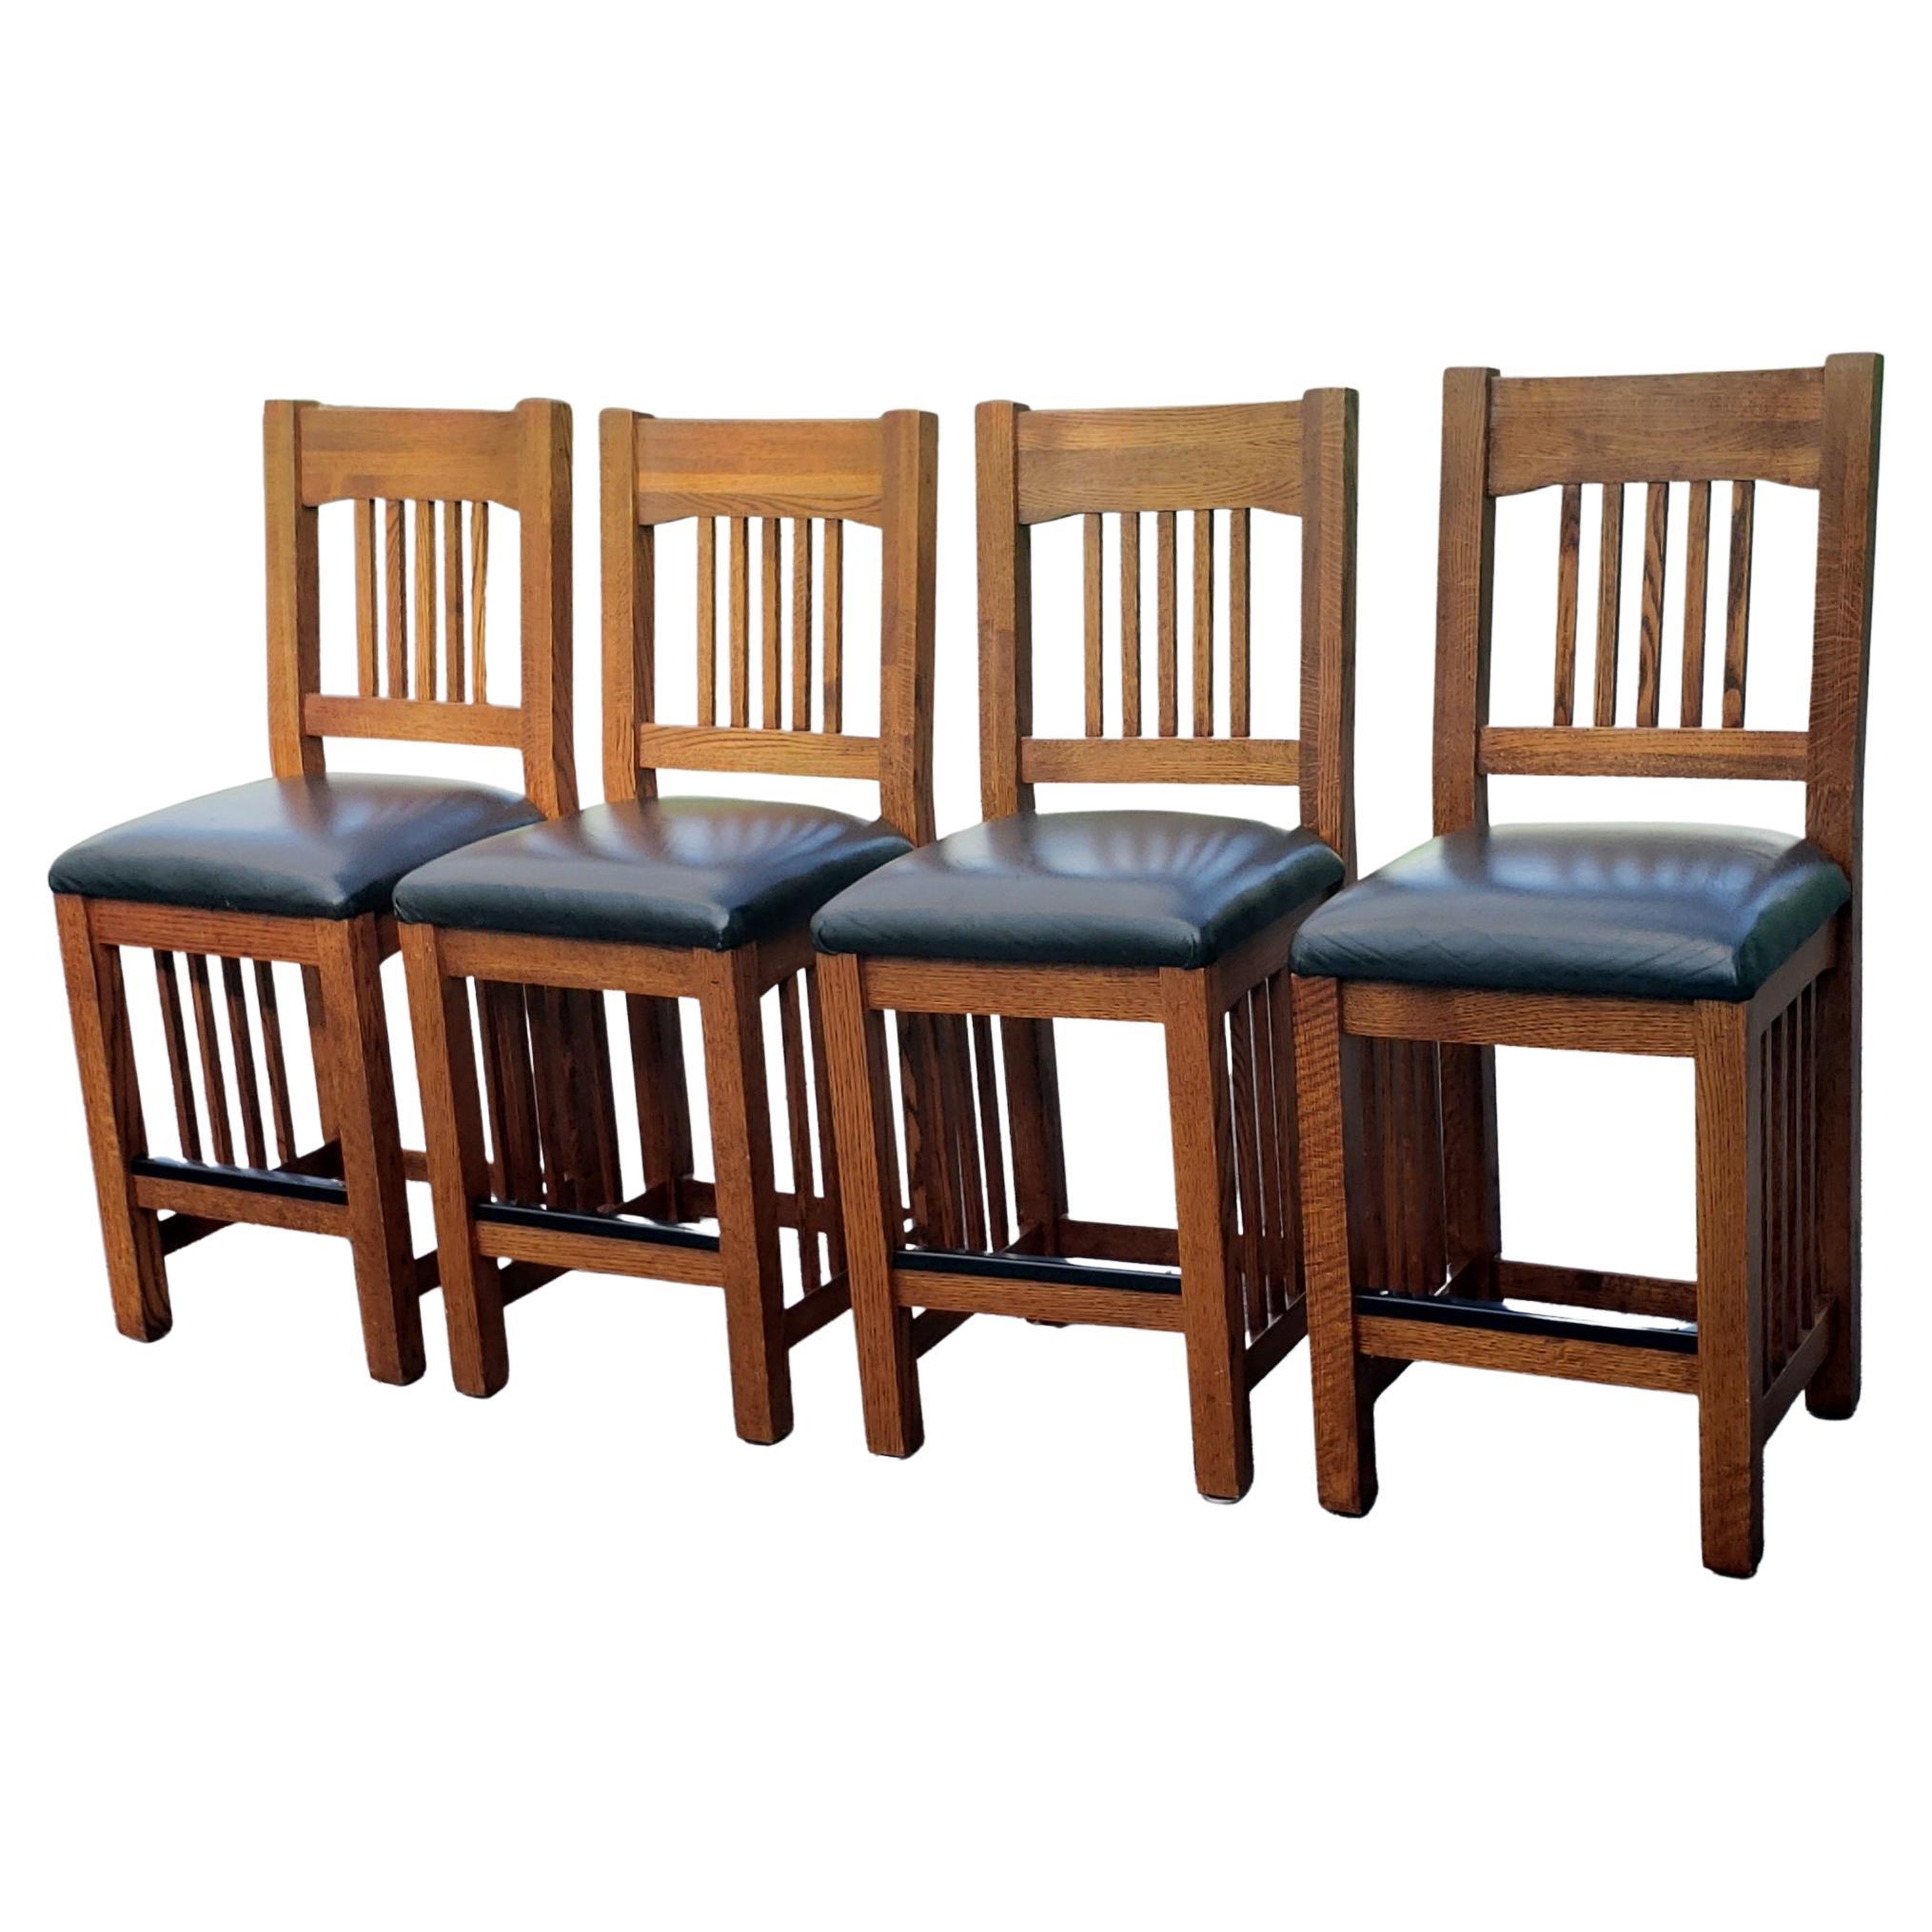 Set of four contemporary mission oak and real leather counter stools
Classic Arts & Crafts style mission oak stools
Measures: 18